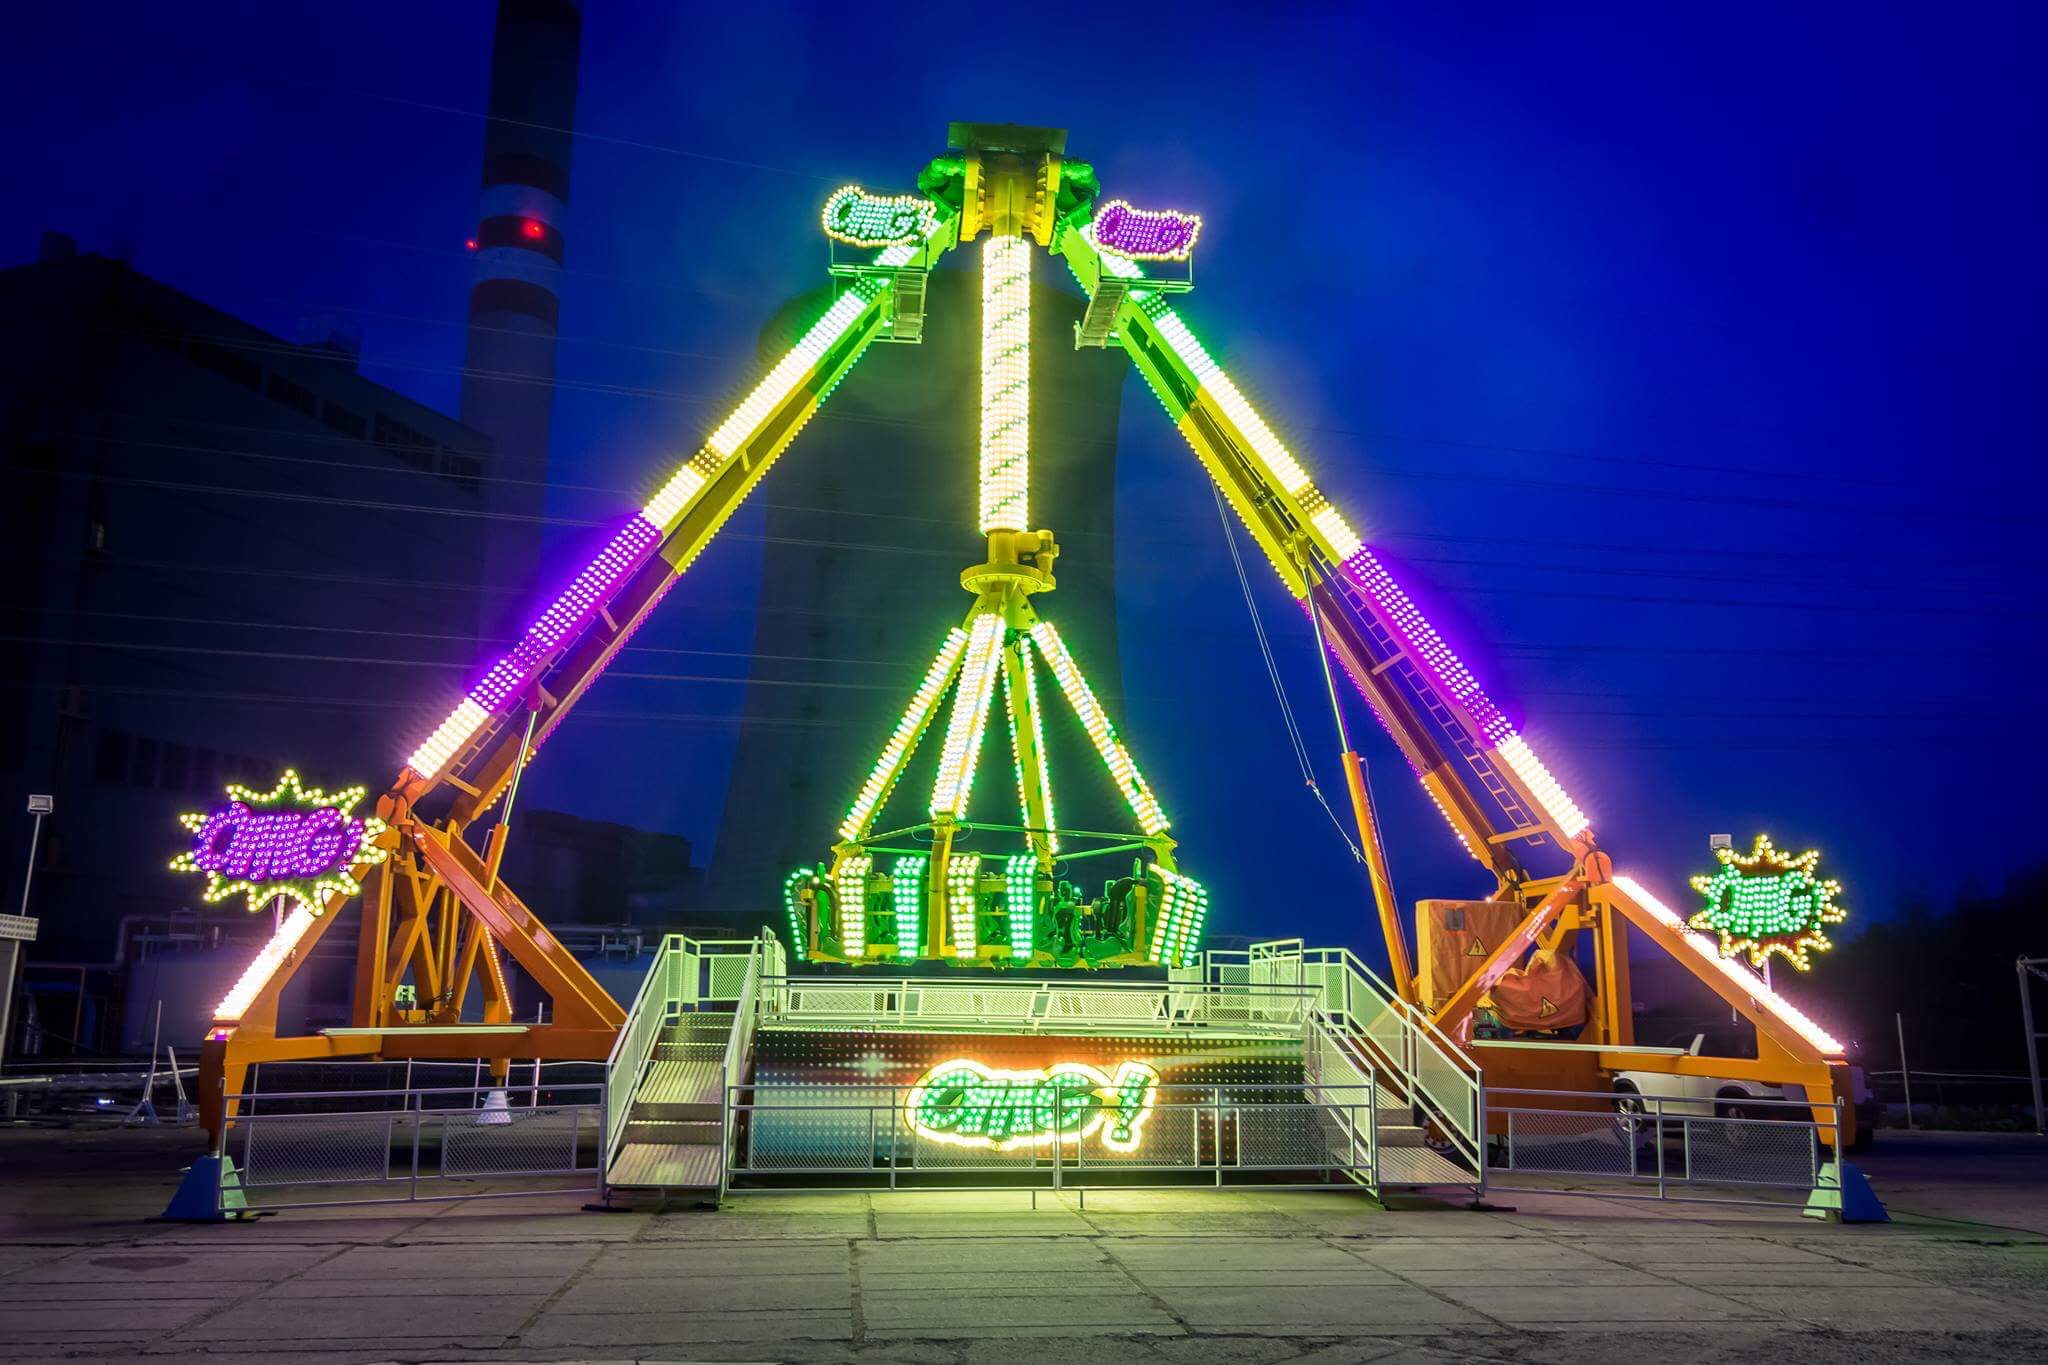 Strawberry Festival promises thrills from new carnival ride